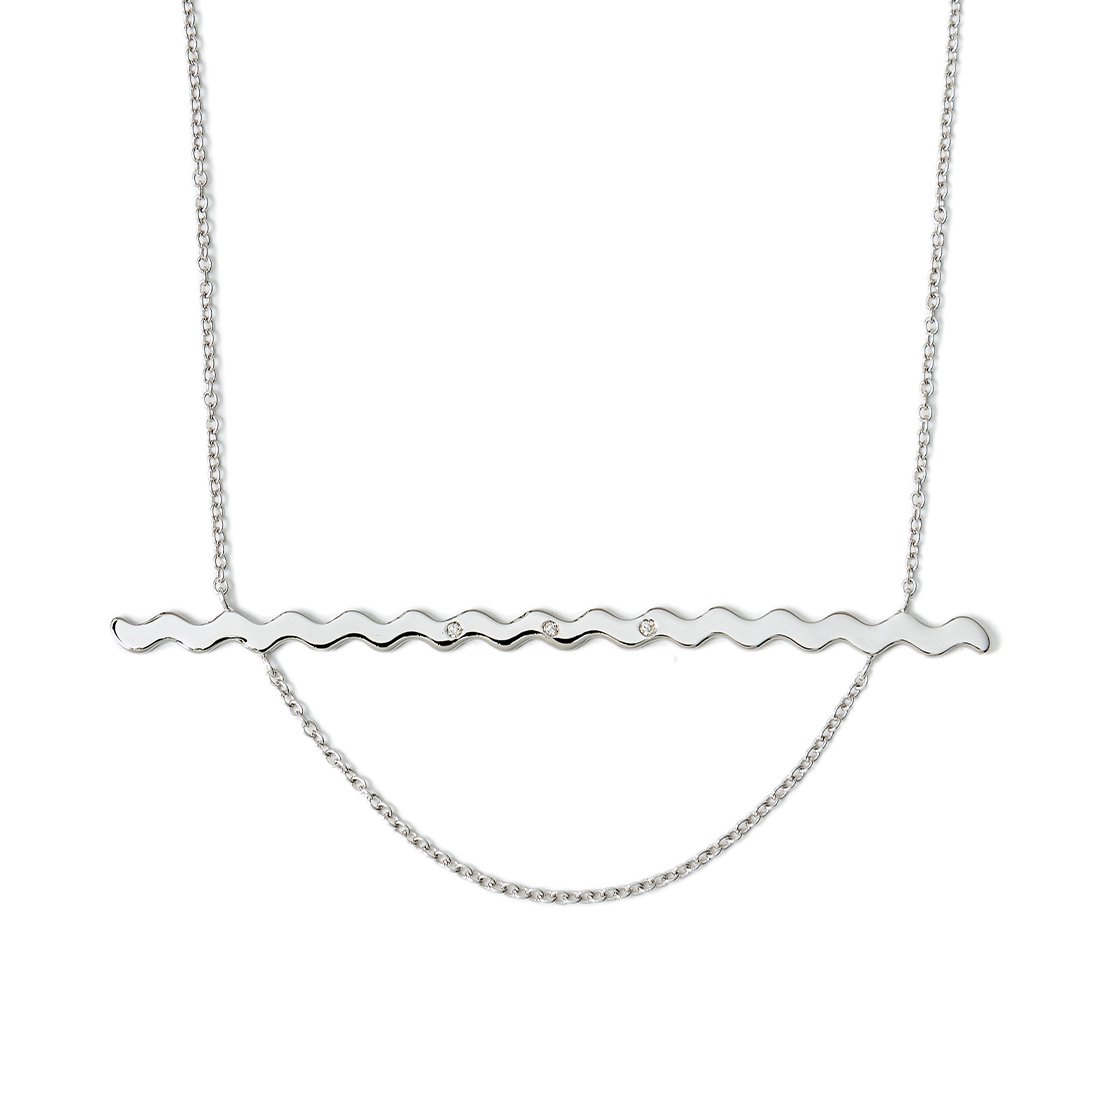 NUWL RIPPLE NECKLACE SILVER